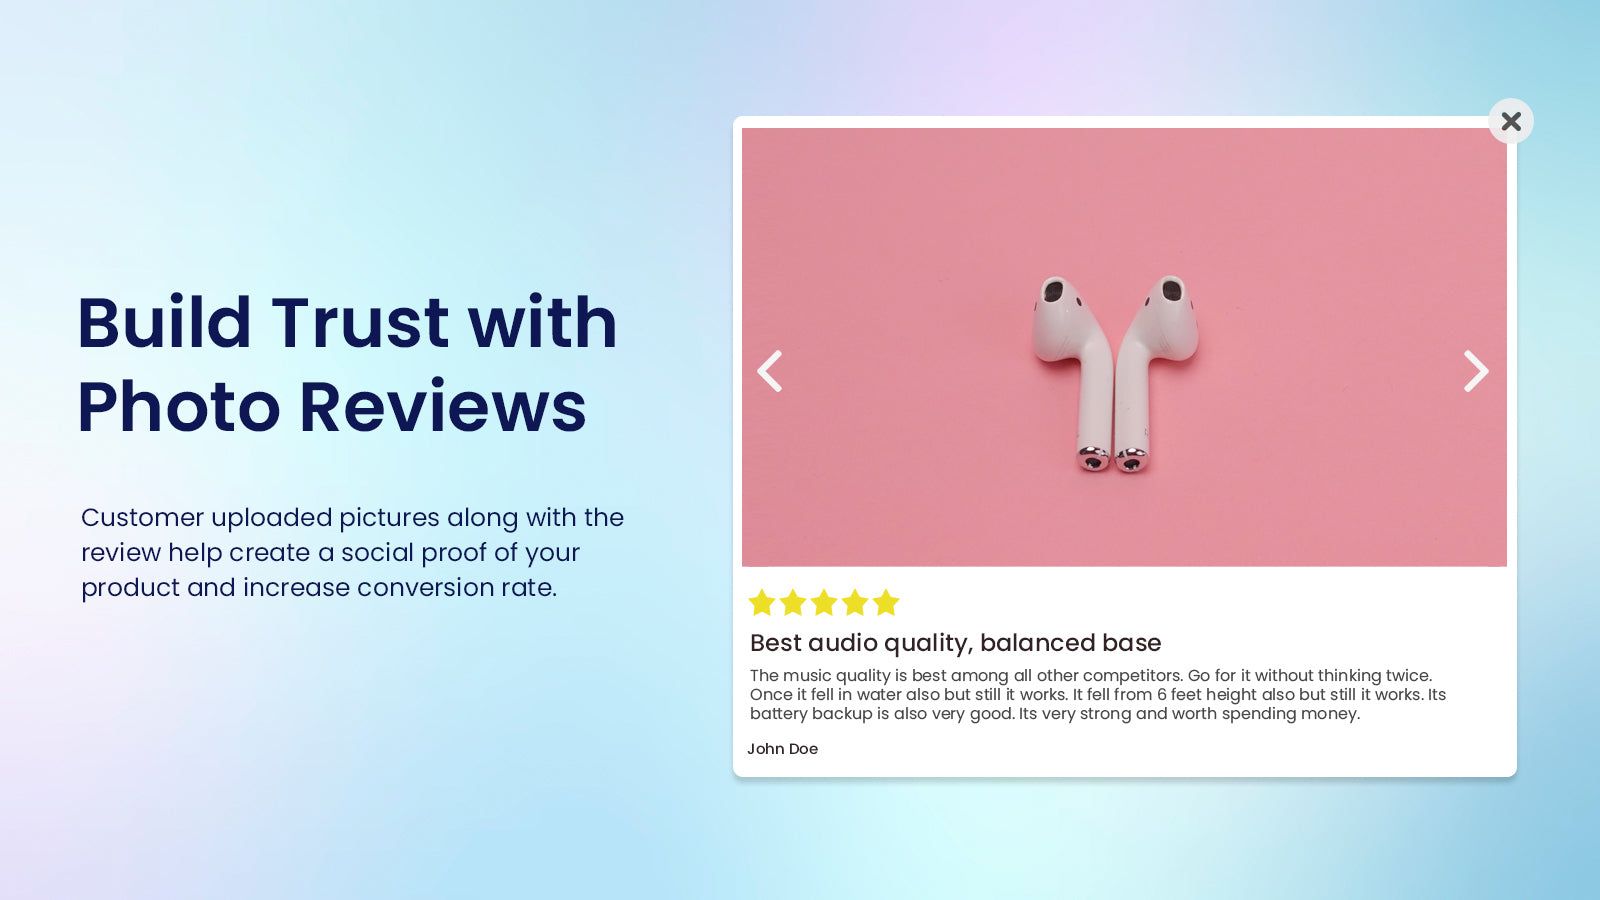 Build trust with photo reviews